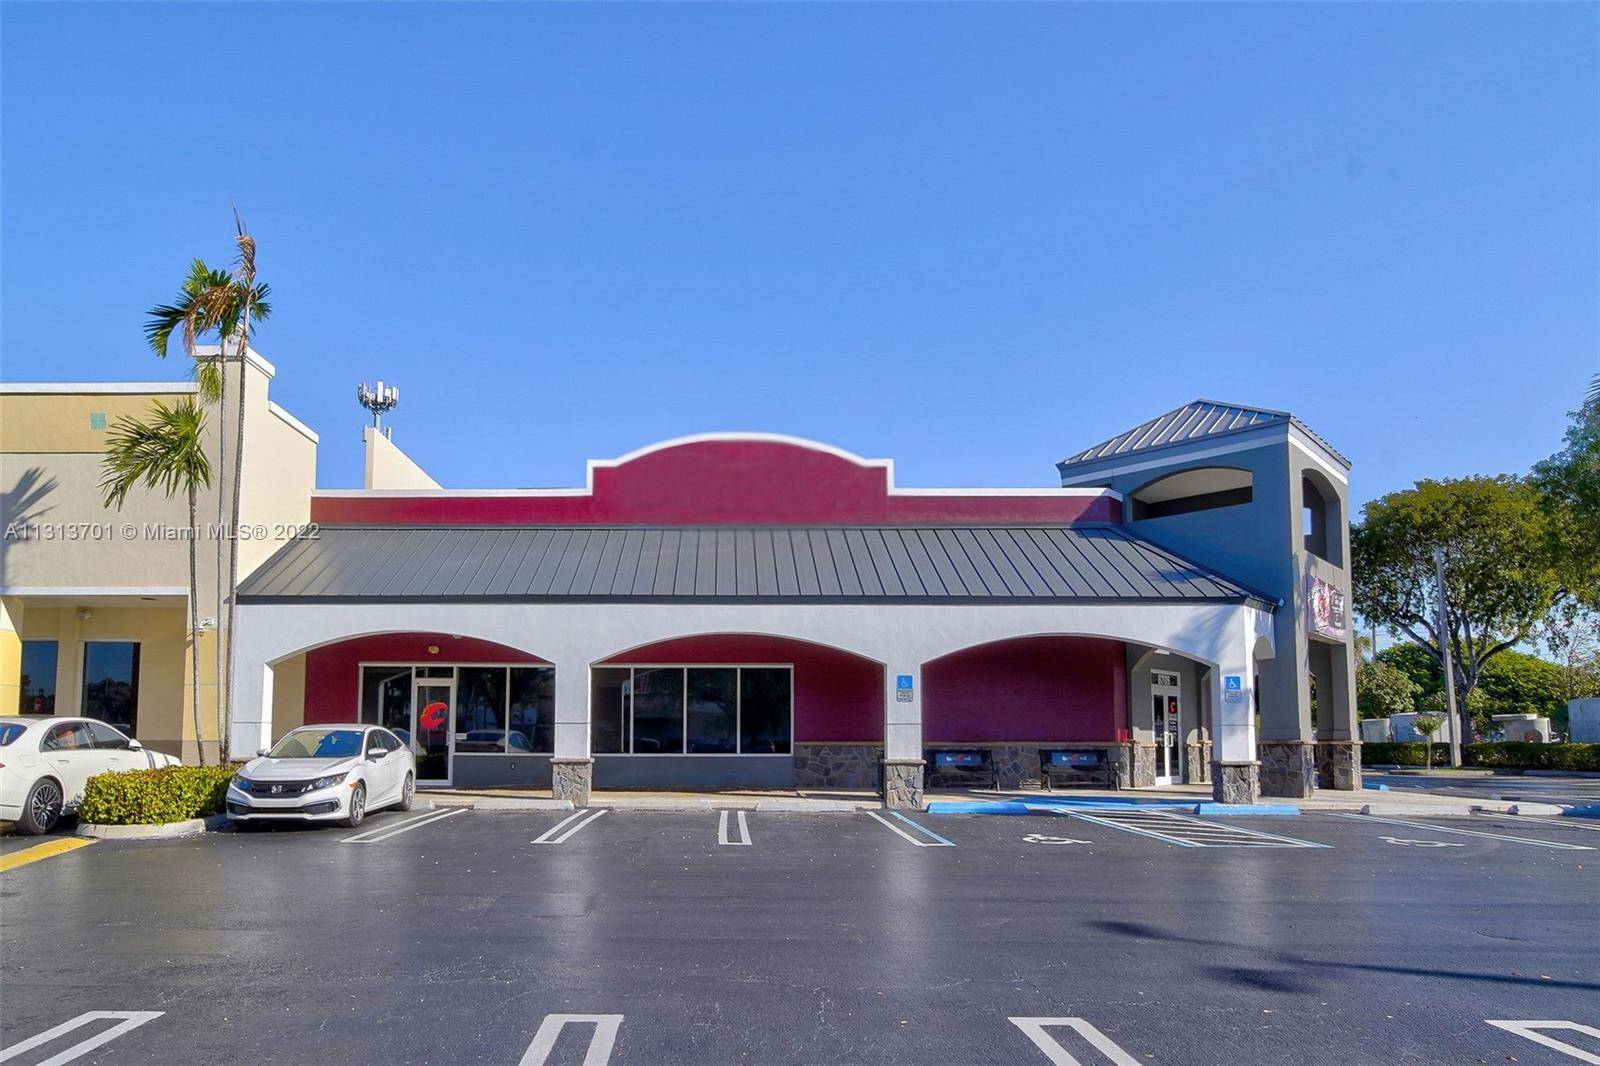 AMAZING OPPORTUNITY TO PURCHASE THE RIGHTS TO OPERATE YOUR RESTAURANT UNDER APPROXIMATELY 8, 500 SQUARE FEET IN THE HIGH TRAFFIC AREA OF THE FALLS MALL.